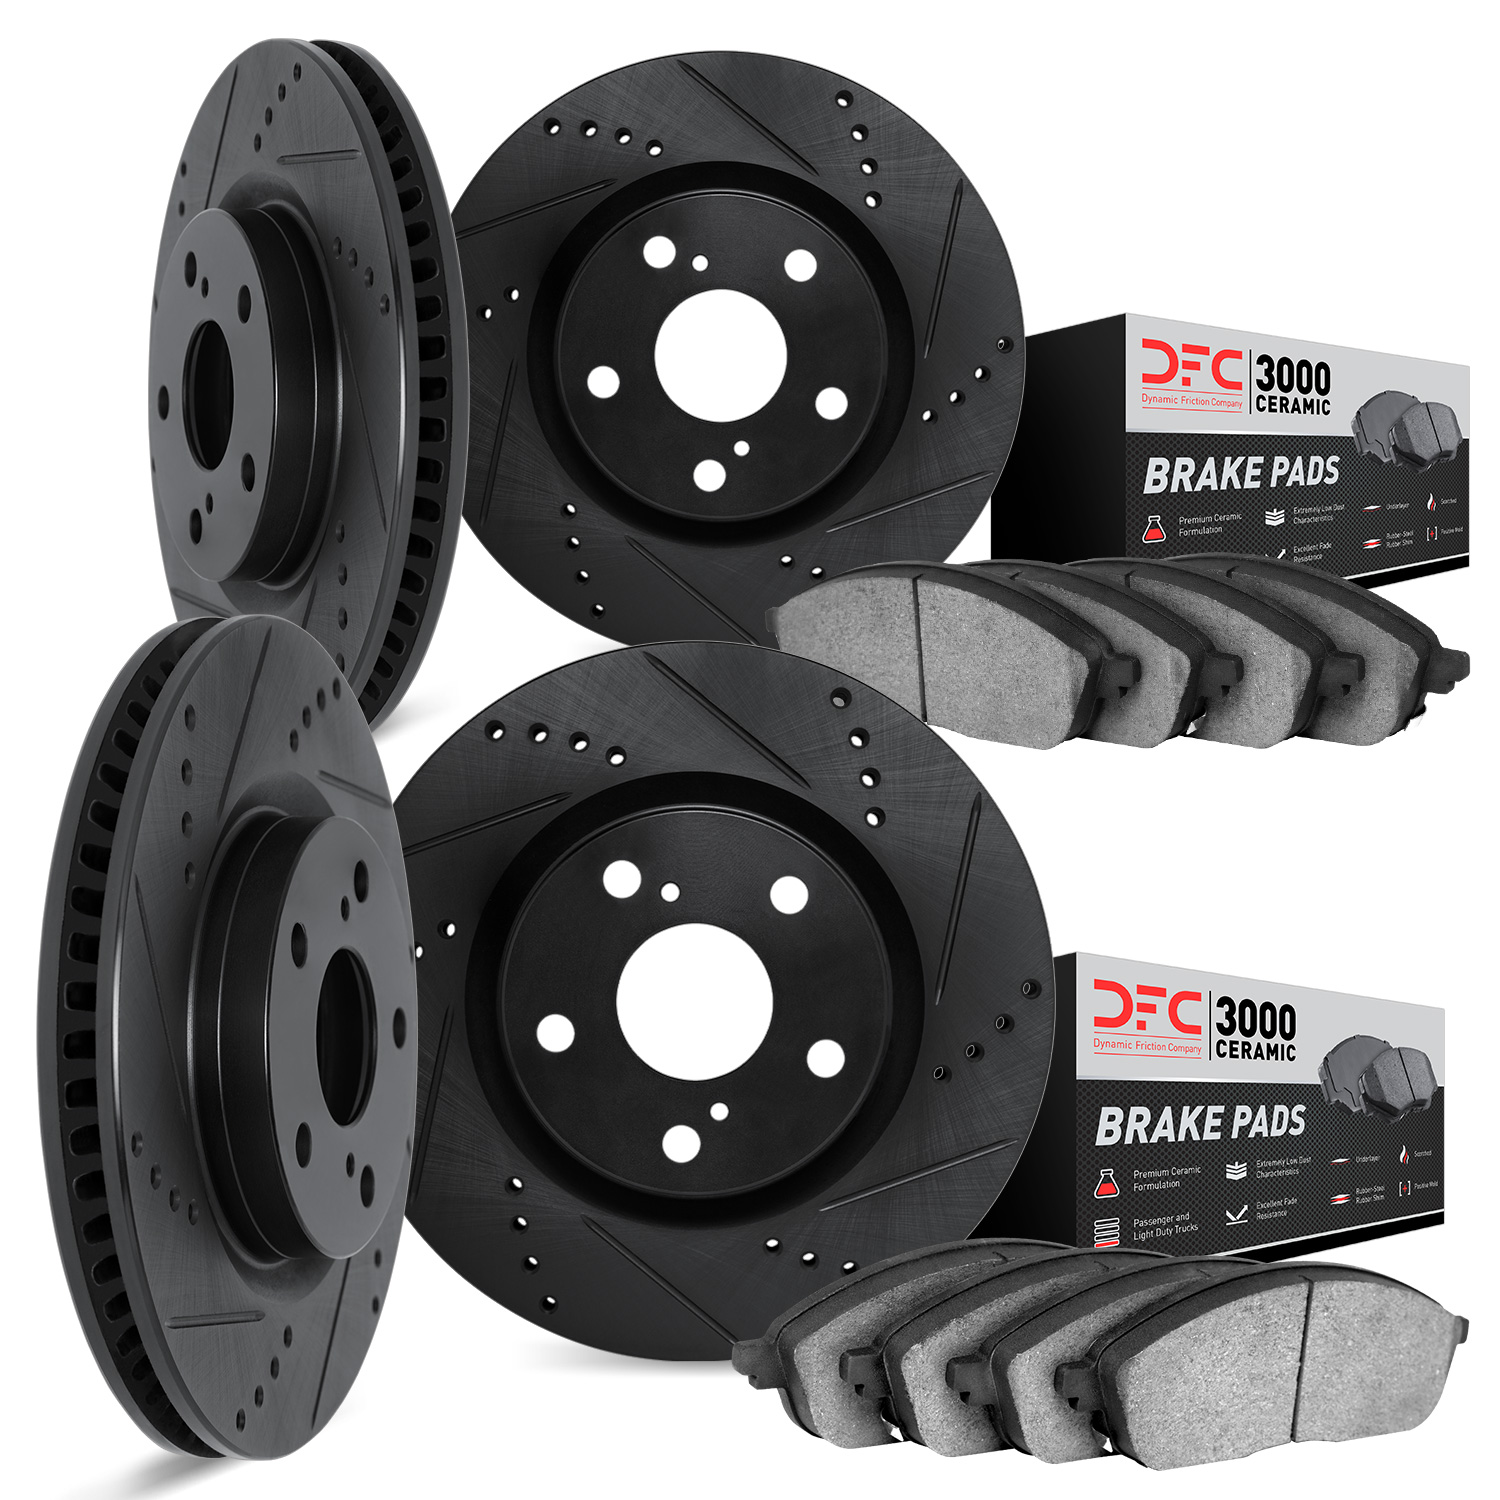 8304-13034 Drilled/Slotted Brake Rotors with 3000-Series Ceramic Brake Pads Kit [Black], 2010-2014 Subaru, Position: Front and R